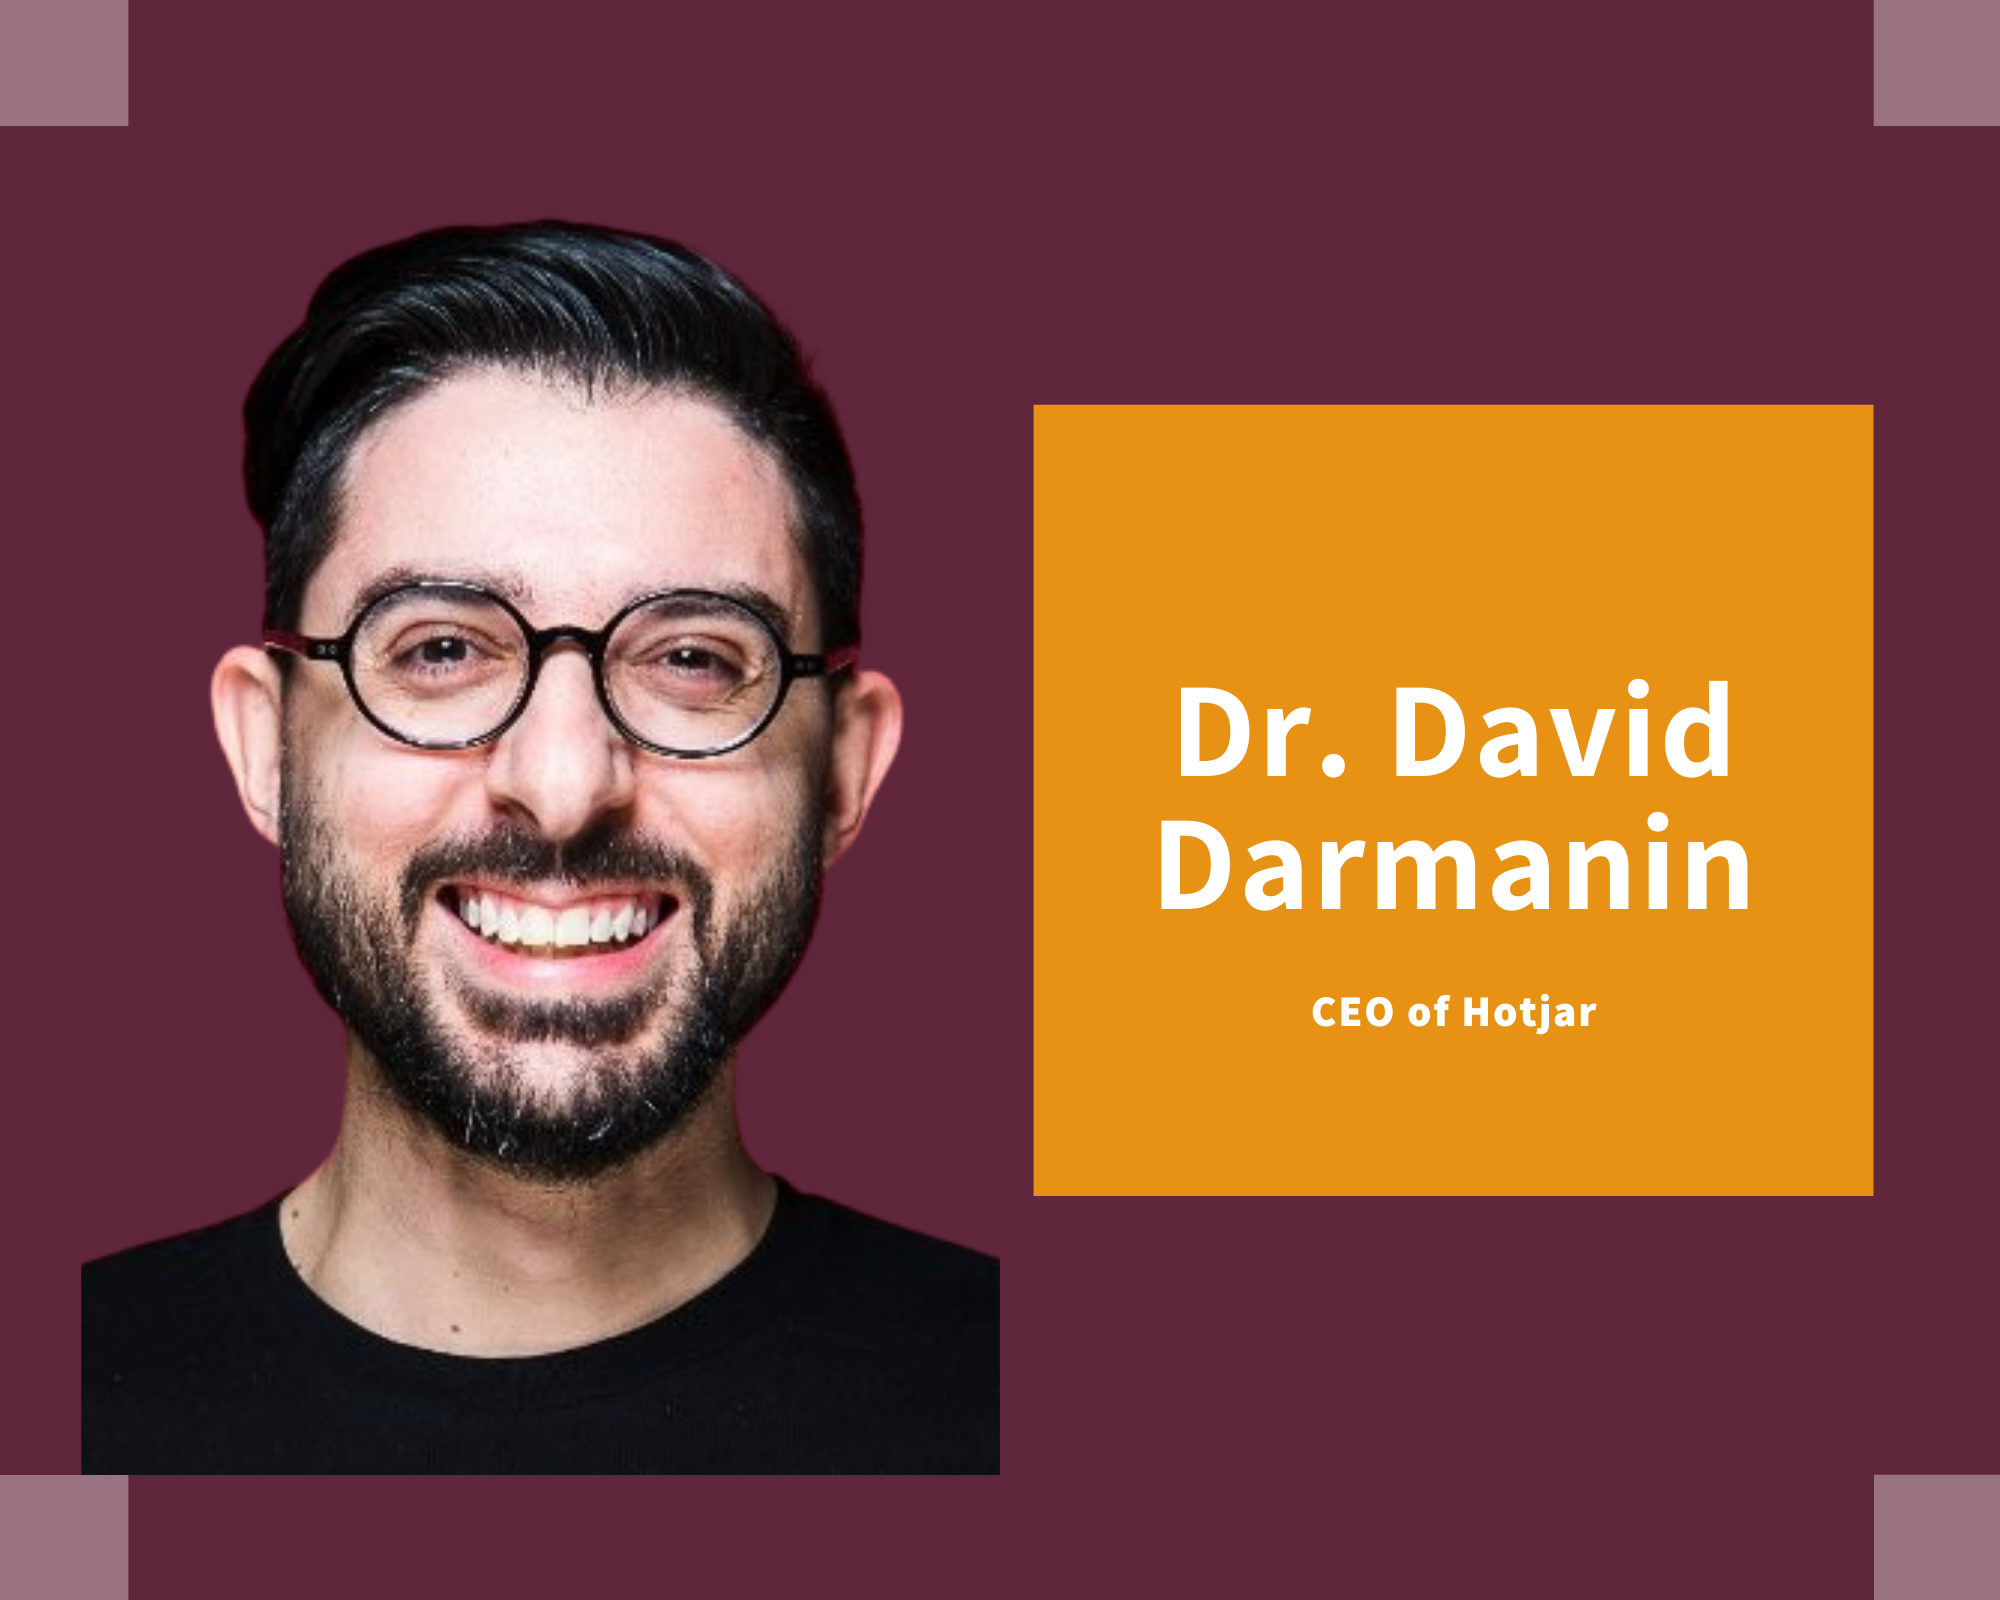 Dr. David Darmanin weighs in on the skills every conversion rate expert needs.